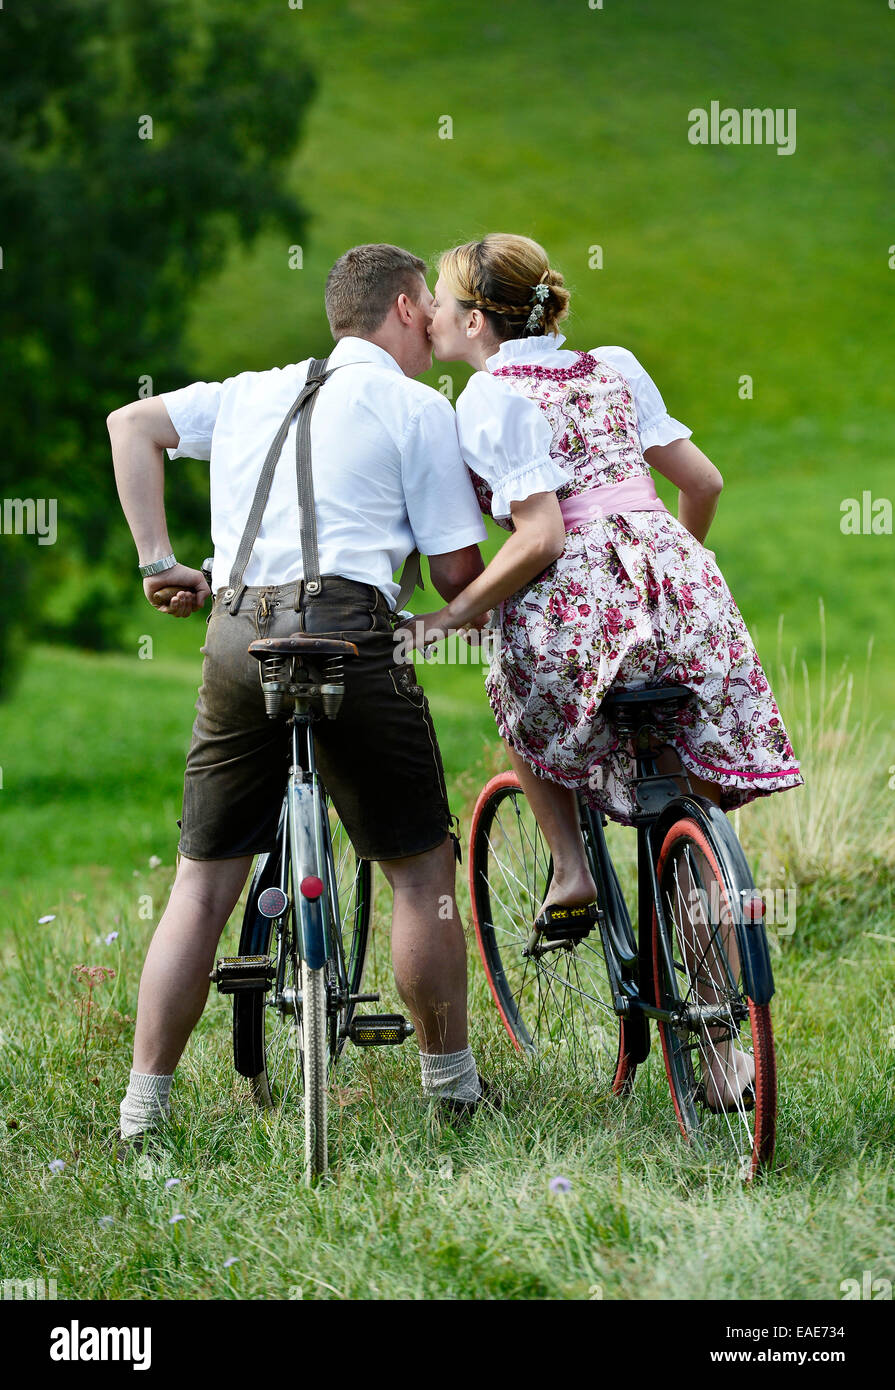 Man wearing leather pants and a woman wearing a dirndl kissing on